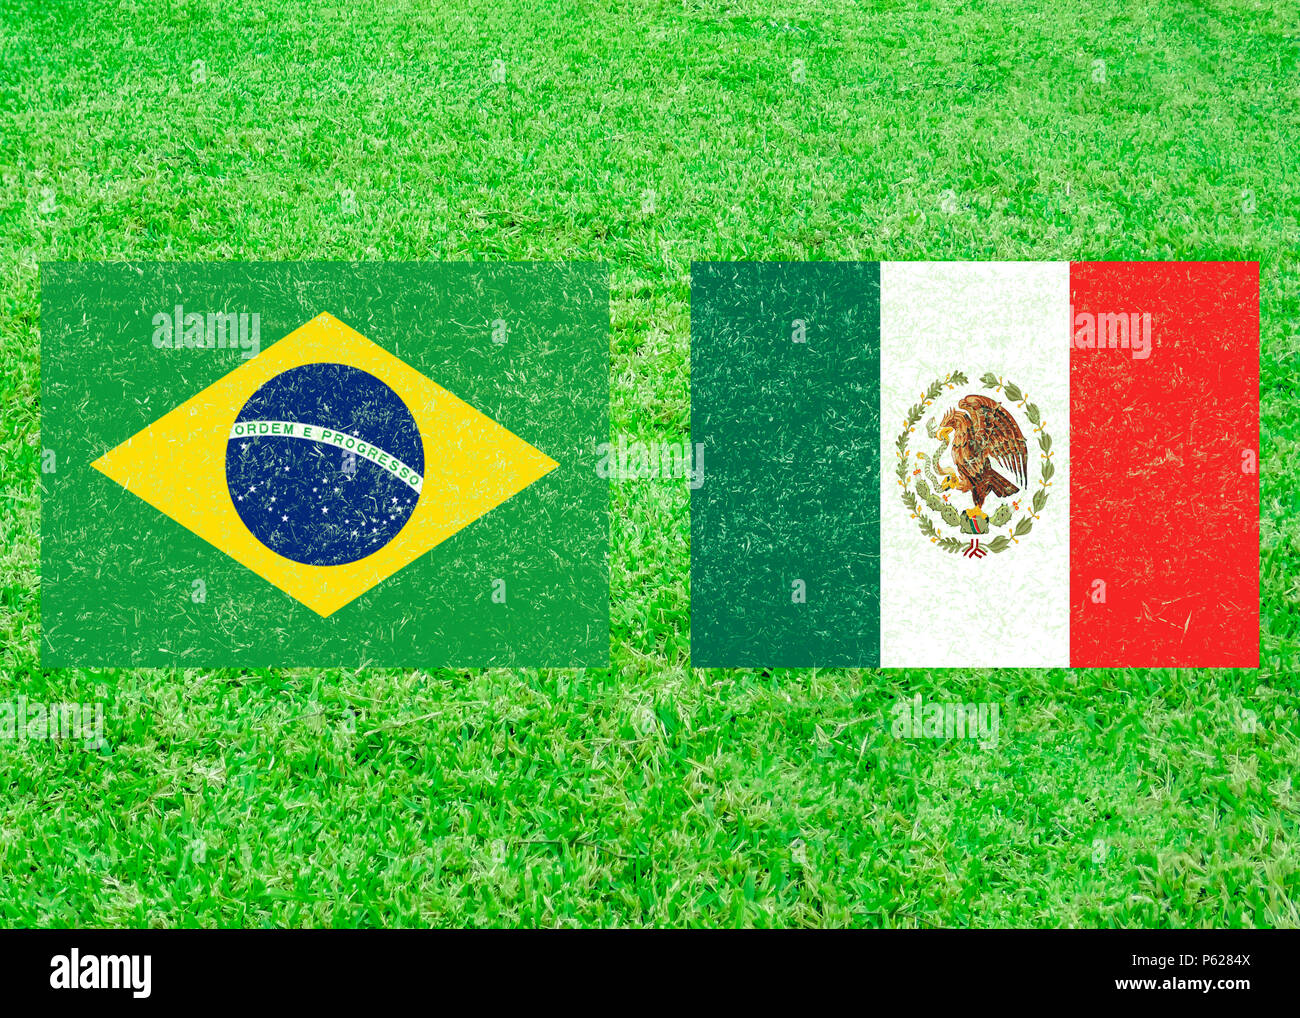 Brazil versus Mexico flags icon over grass background Stock Photo